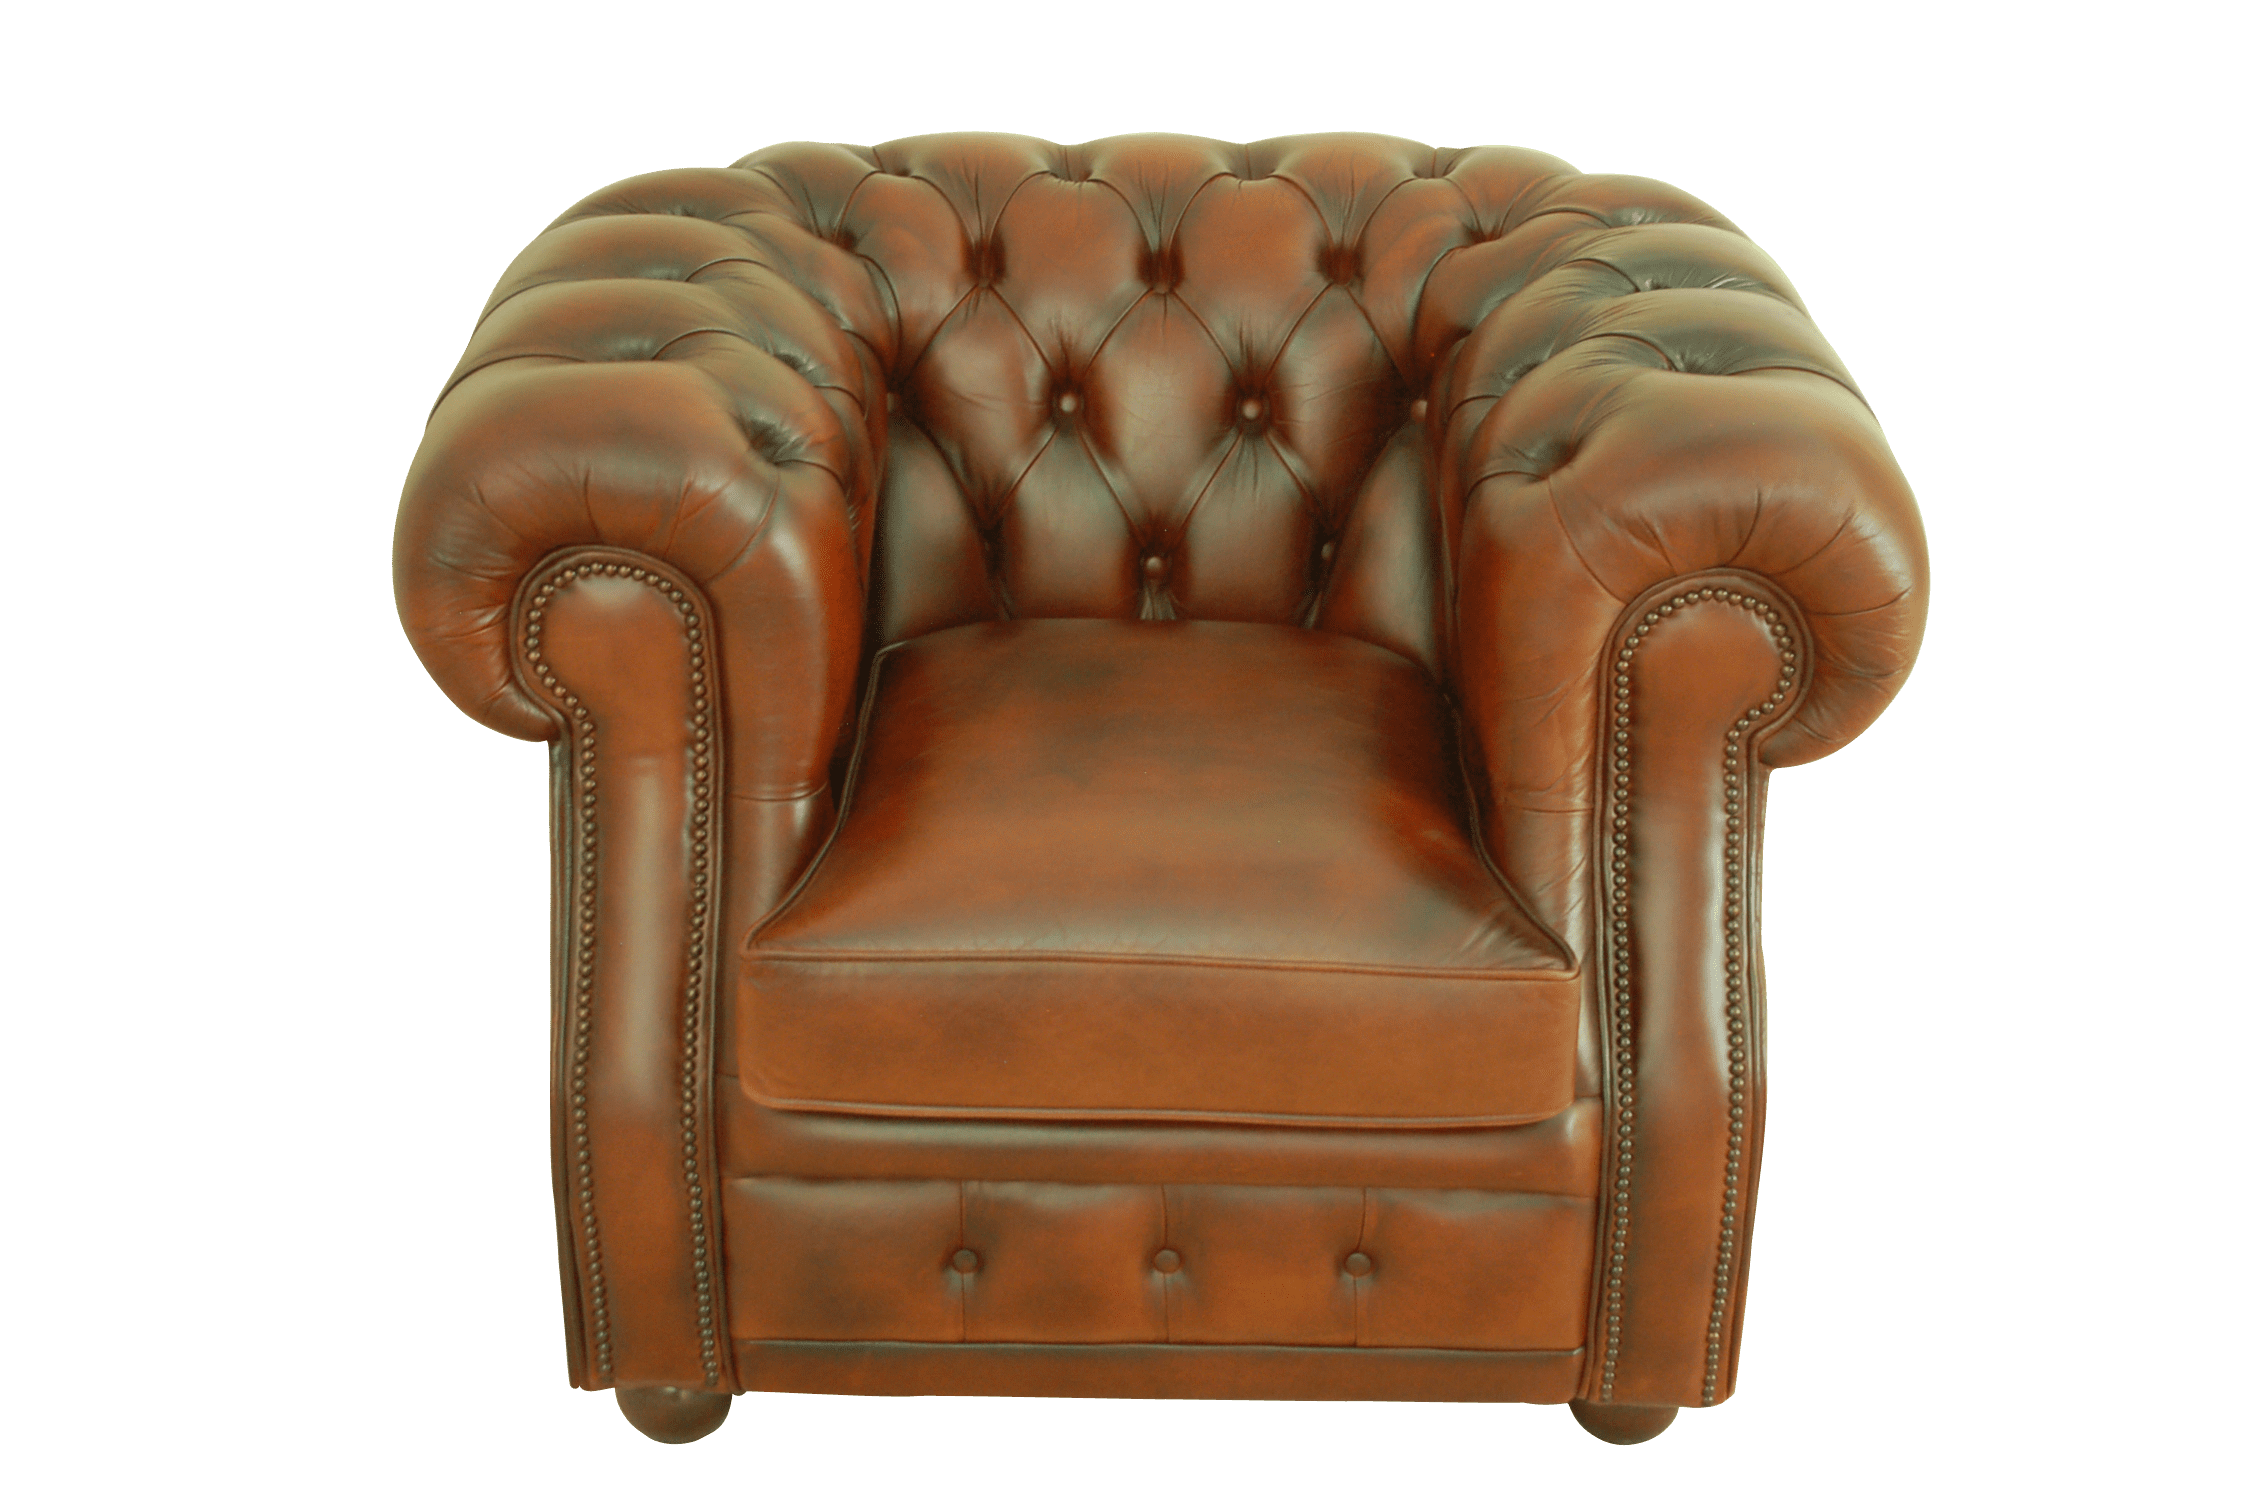 Fauteuil chesterfield #173396 - Chesterfield